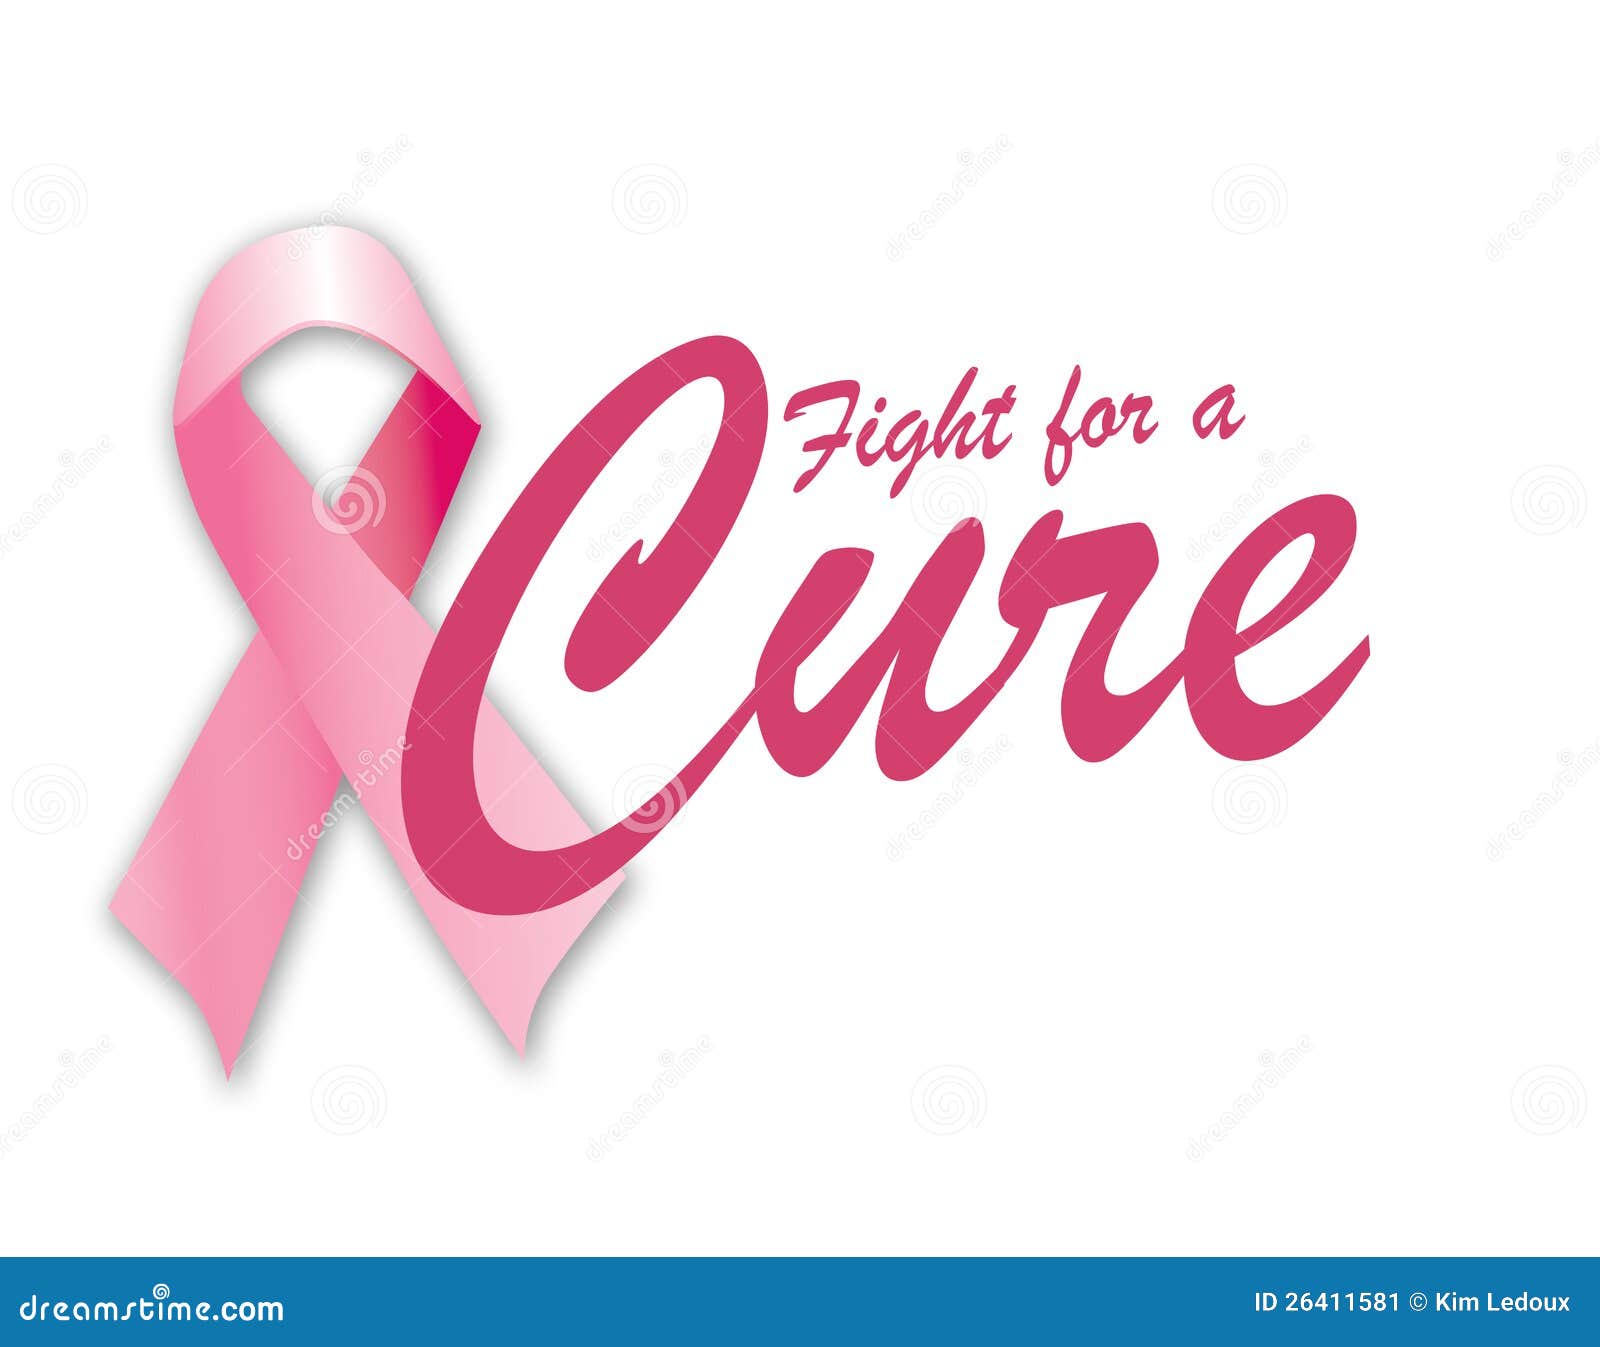 fight for a cure